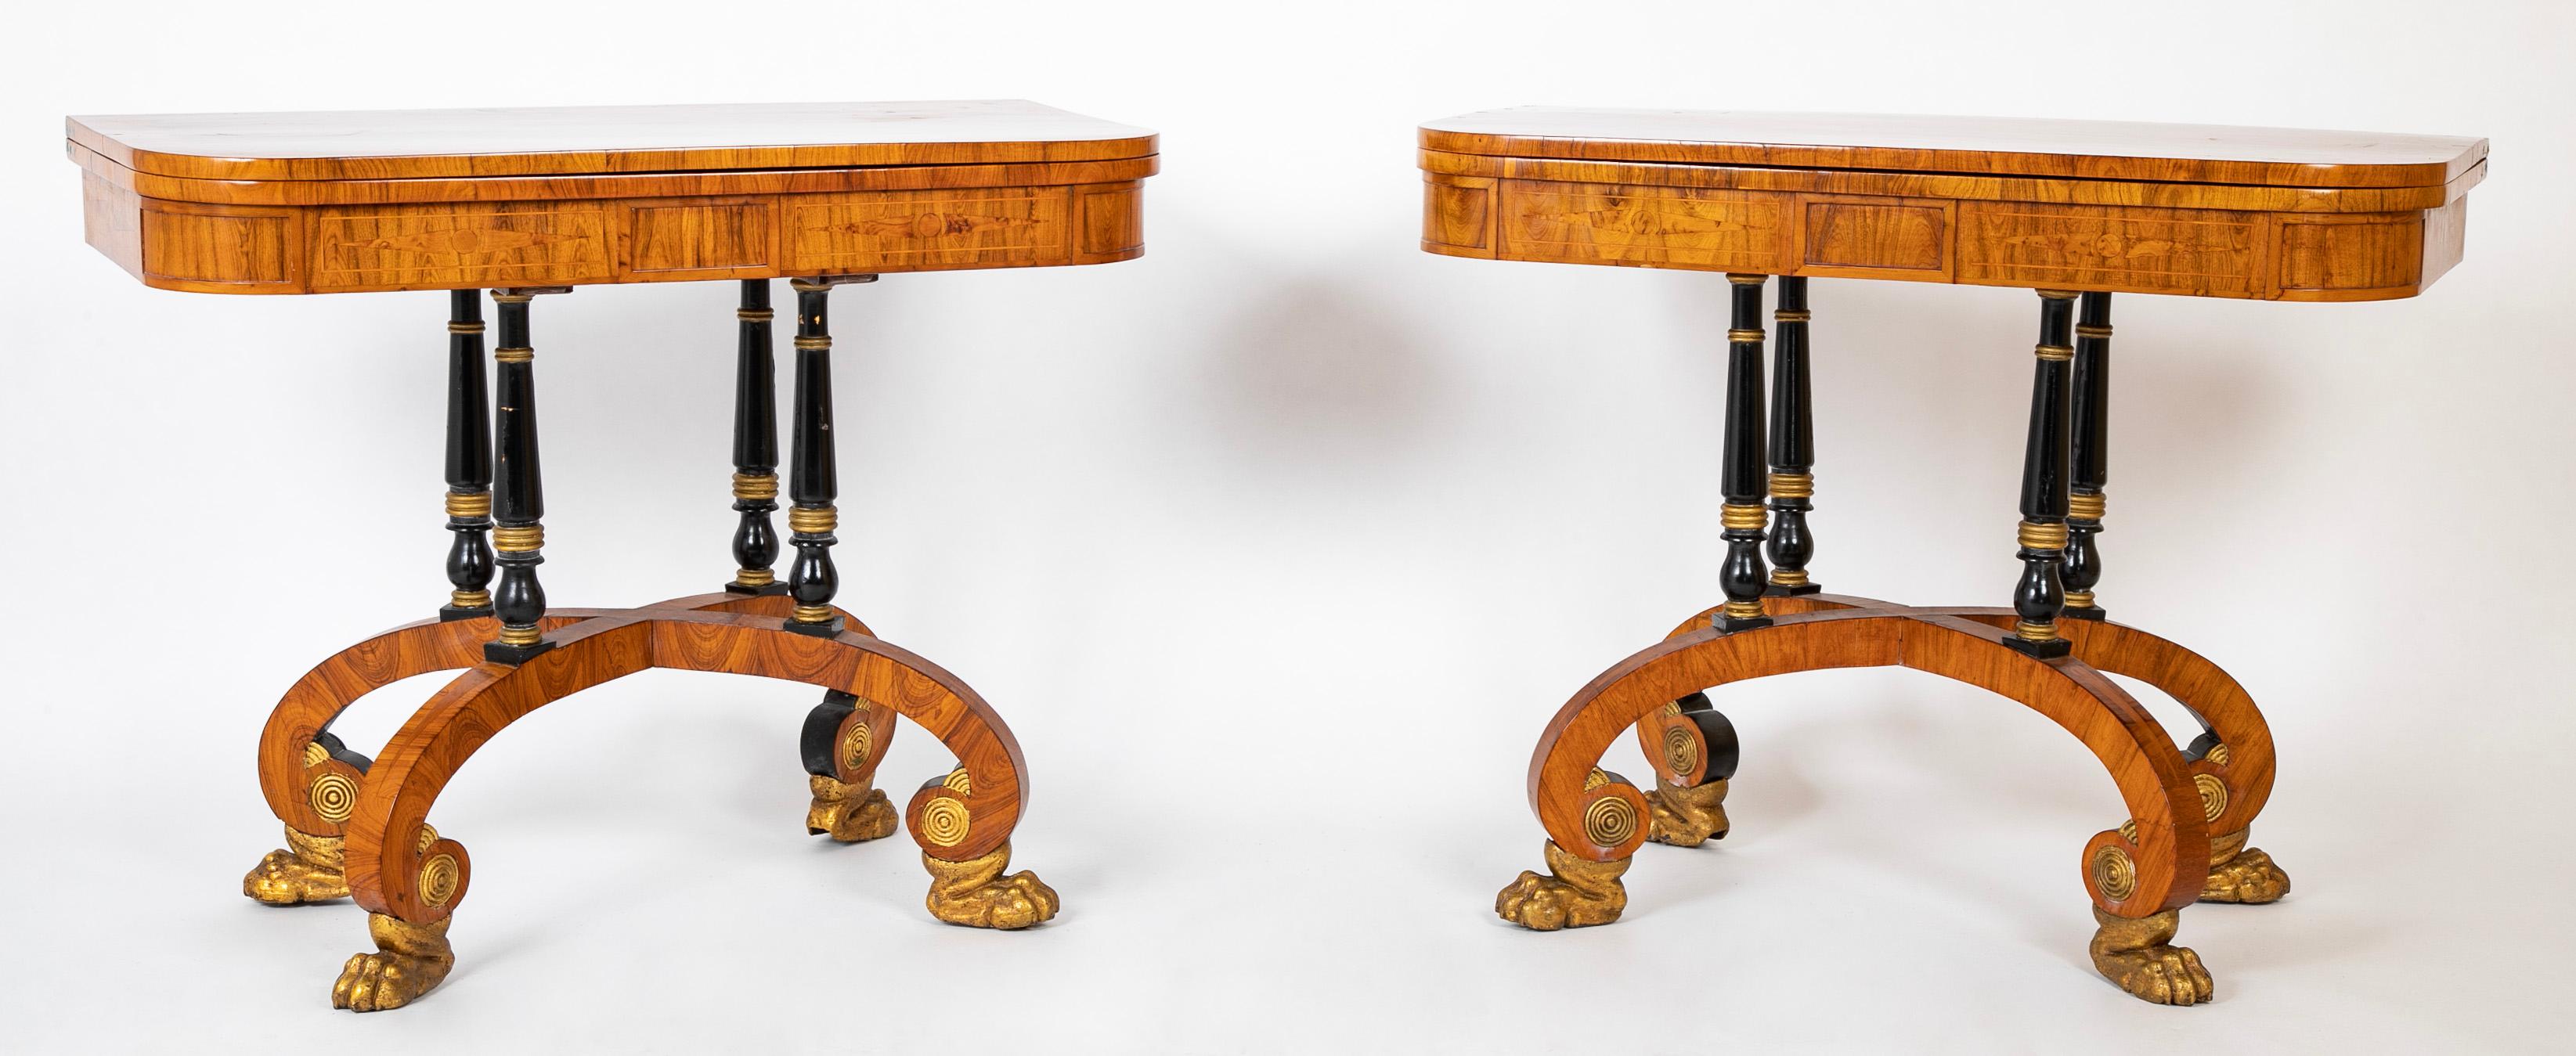 Rare Regency Pair of Games Tables For Sale 6